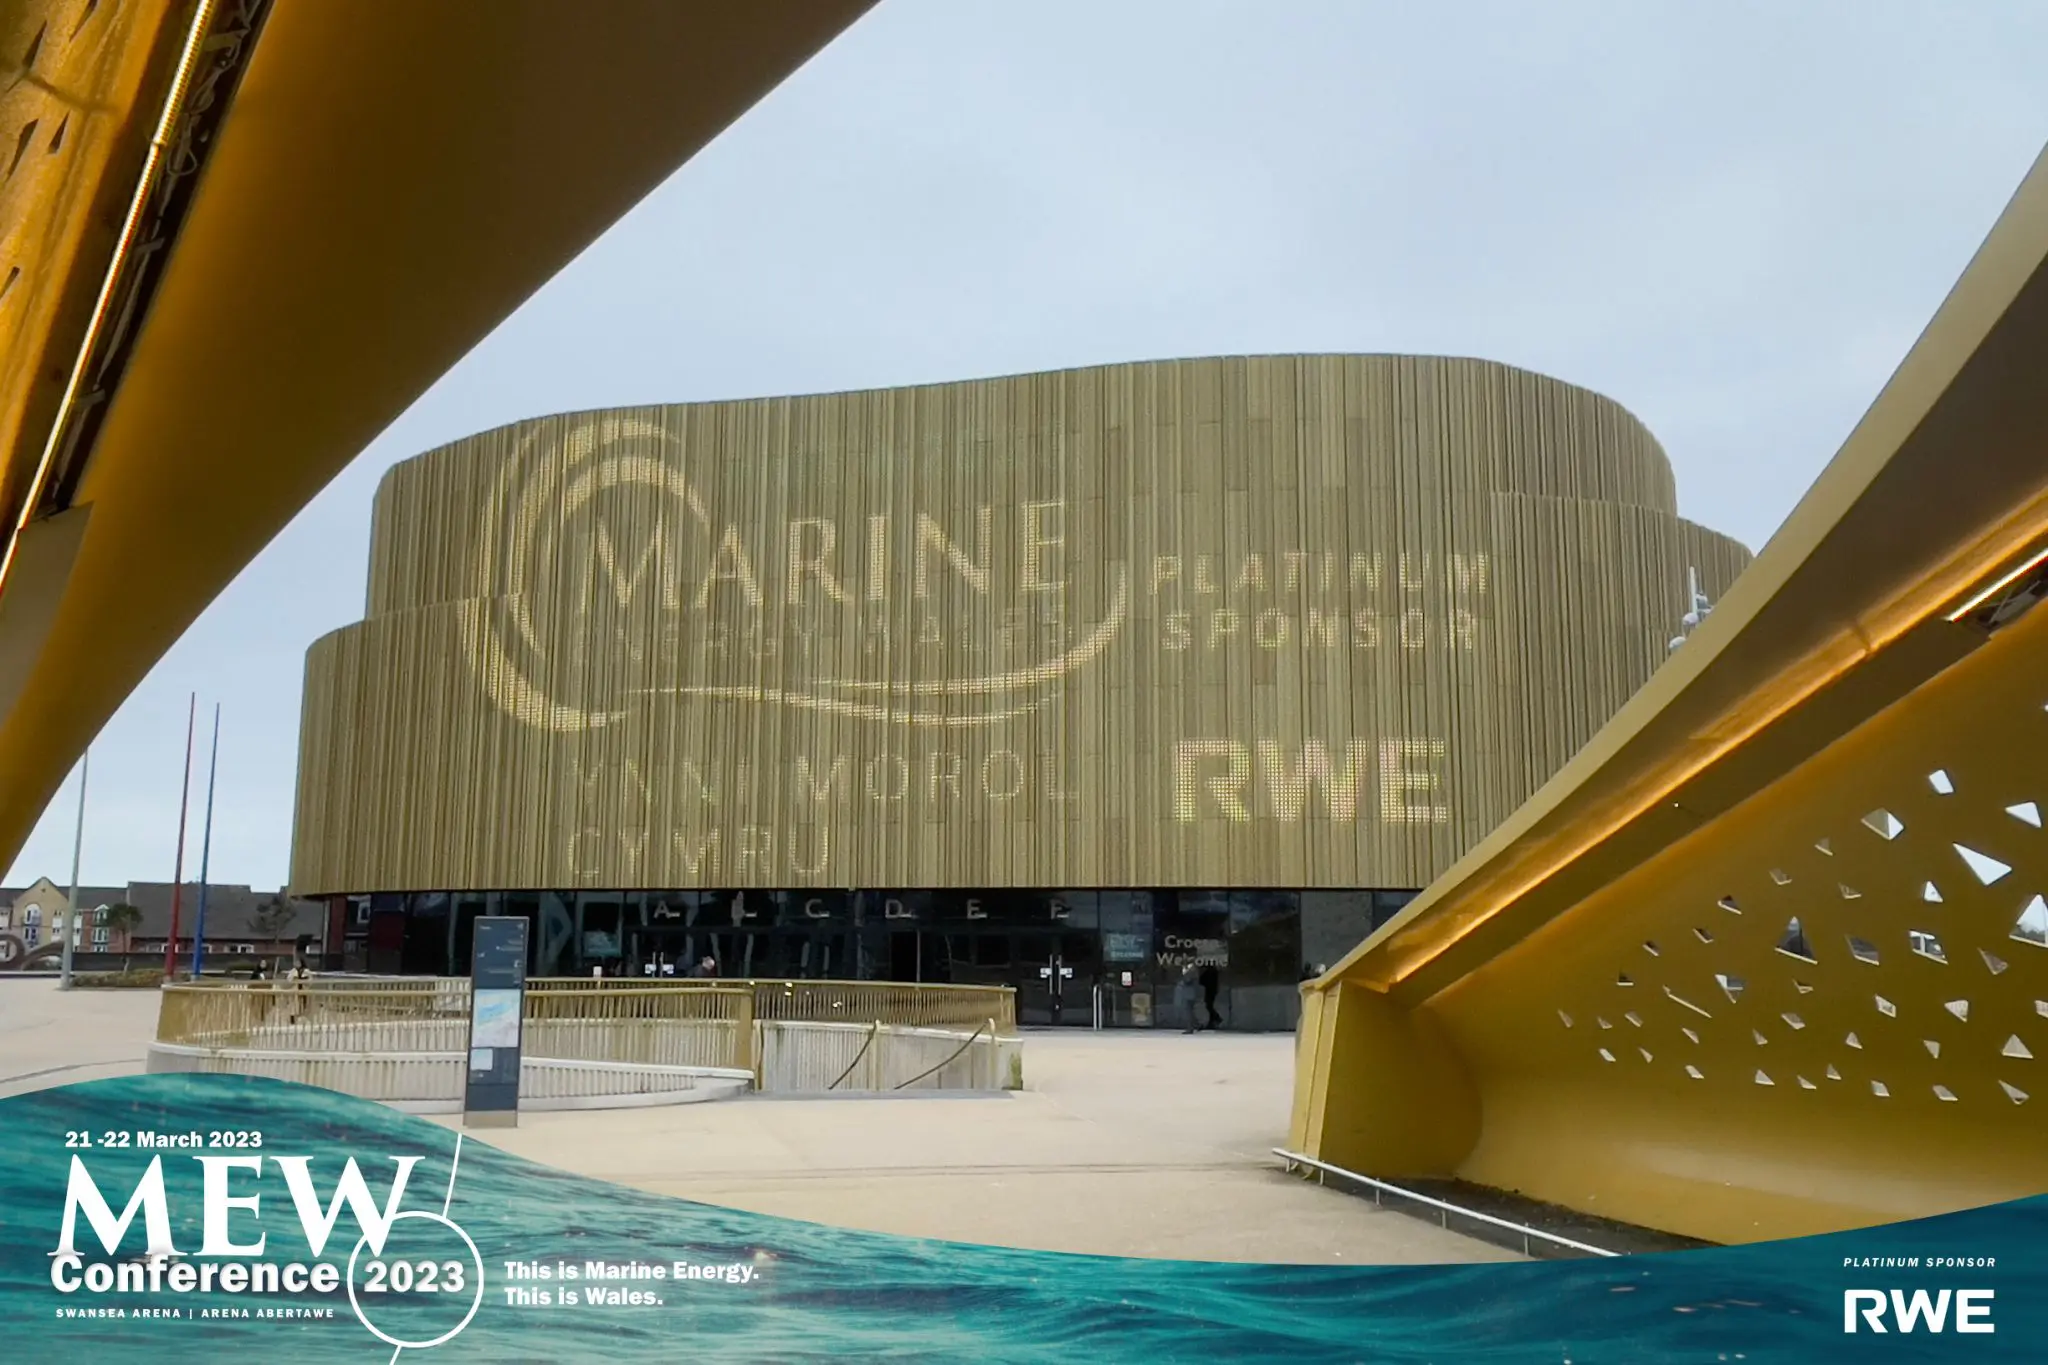 Marine Energy Wales 2023 conference: time to “seas” the moment